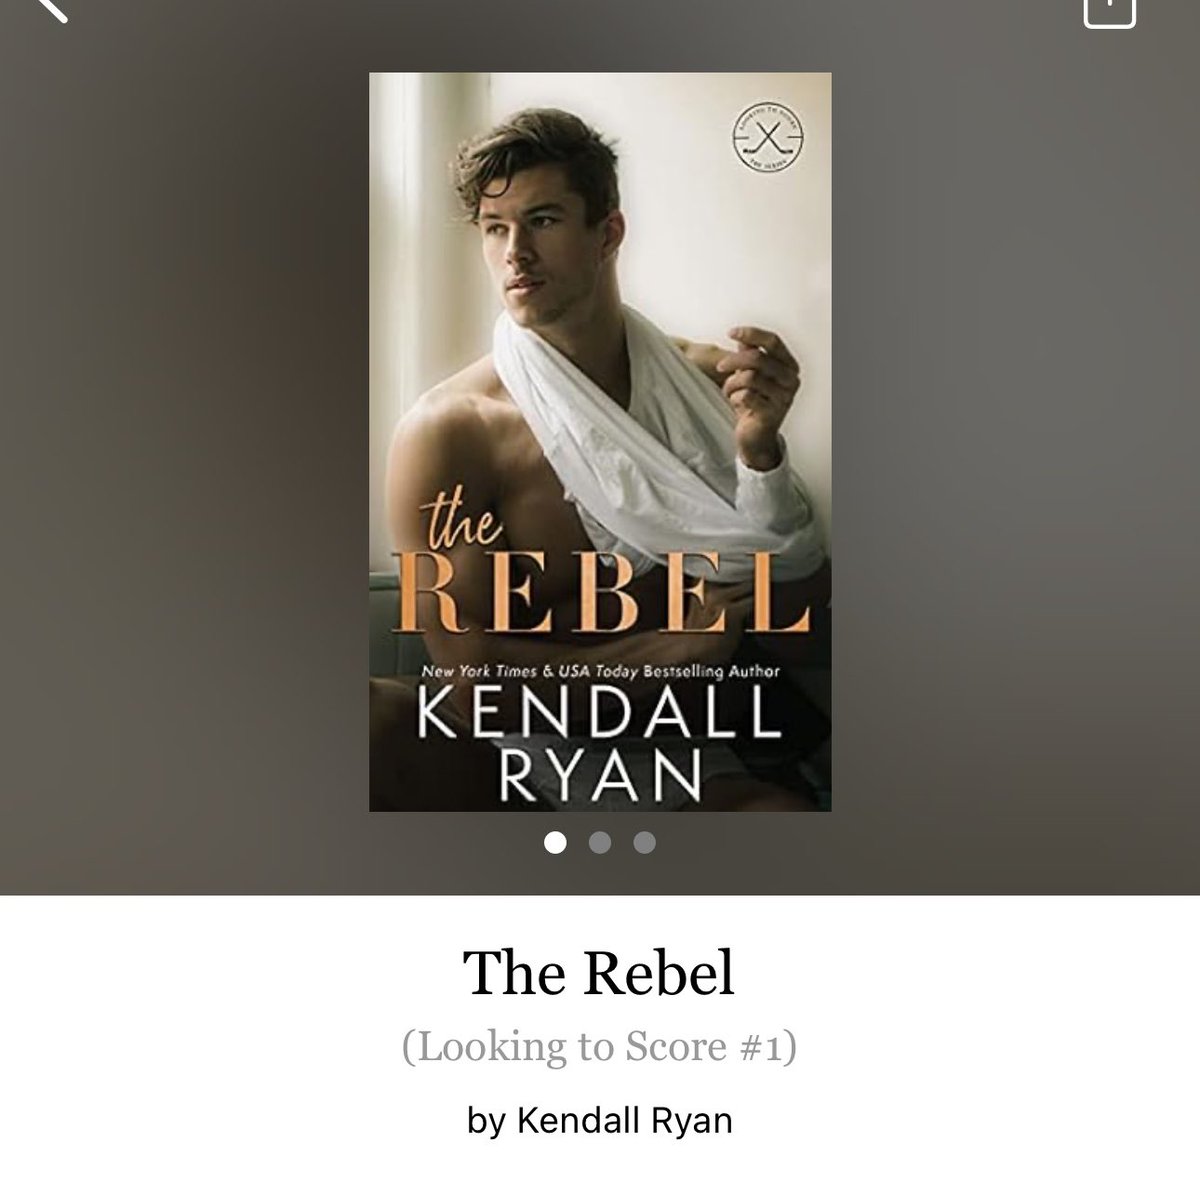 The Rebel by Kendall Ryan 

#TheRebel by #kemdallRyan #430of400 #6281 #35chapters #310pages #Series #Audiobook #67for17 #Hoopla #7houraudiobook #holtonAndEden #Book1of4 #april2024 #LookingToScoreSeries #clearingoffreadingshelves #whatsnext #readitquick